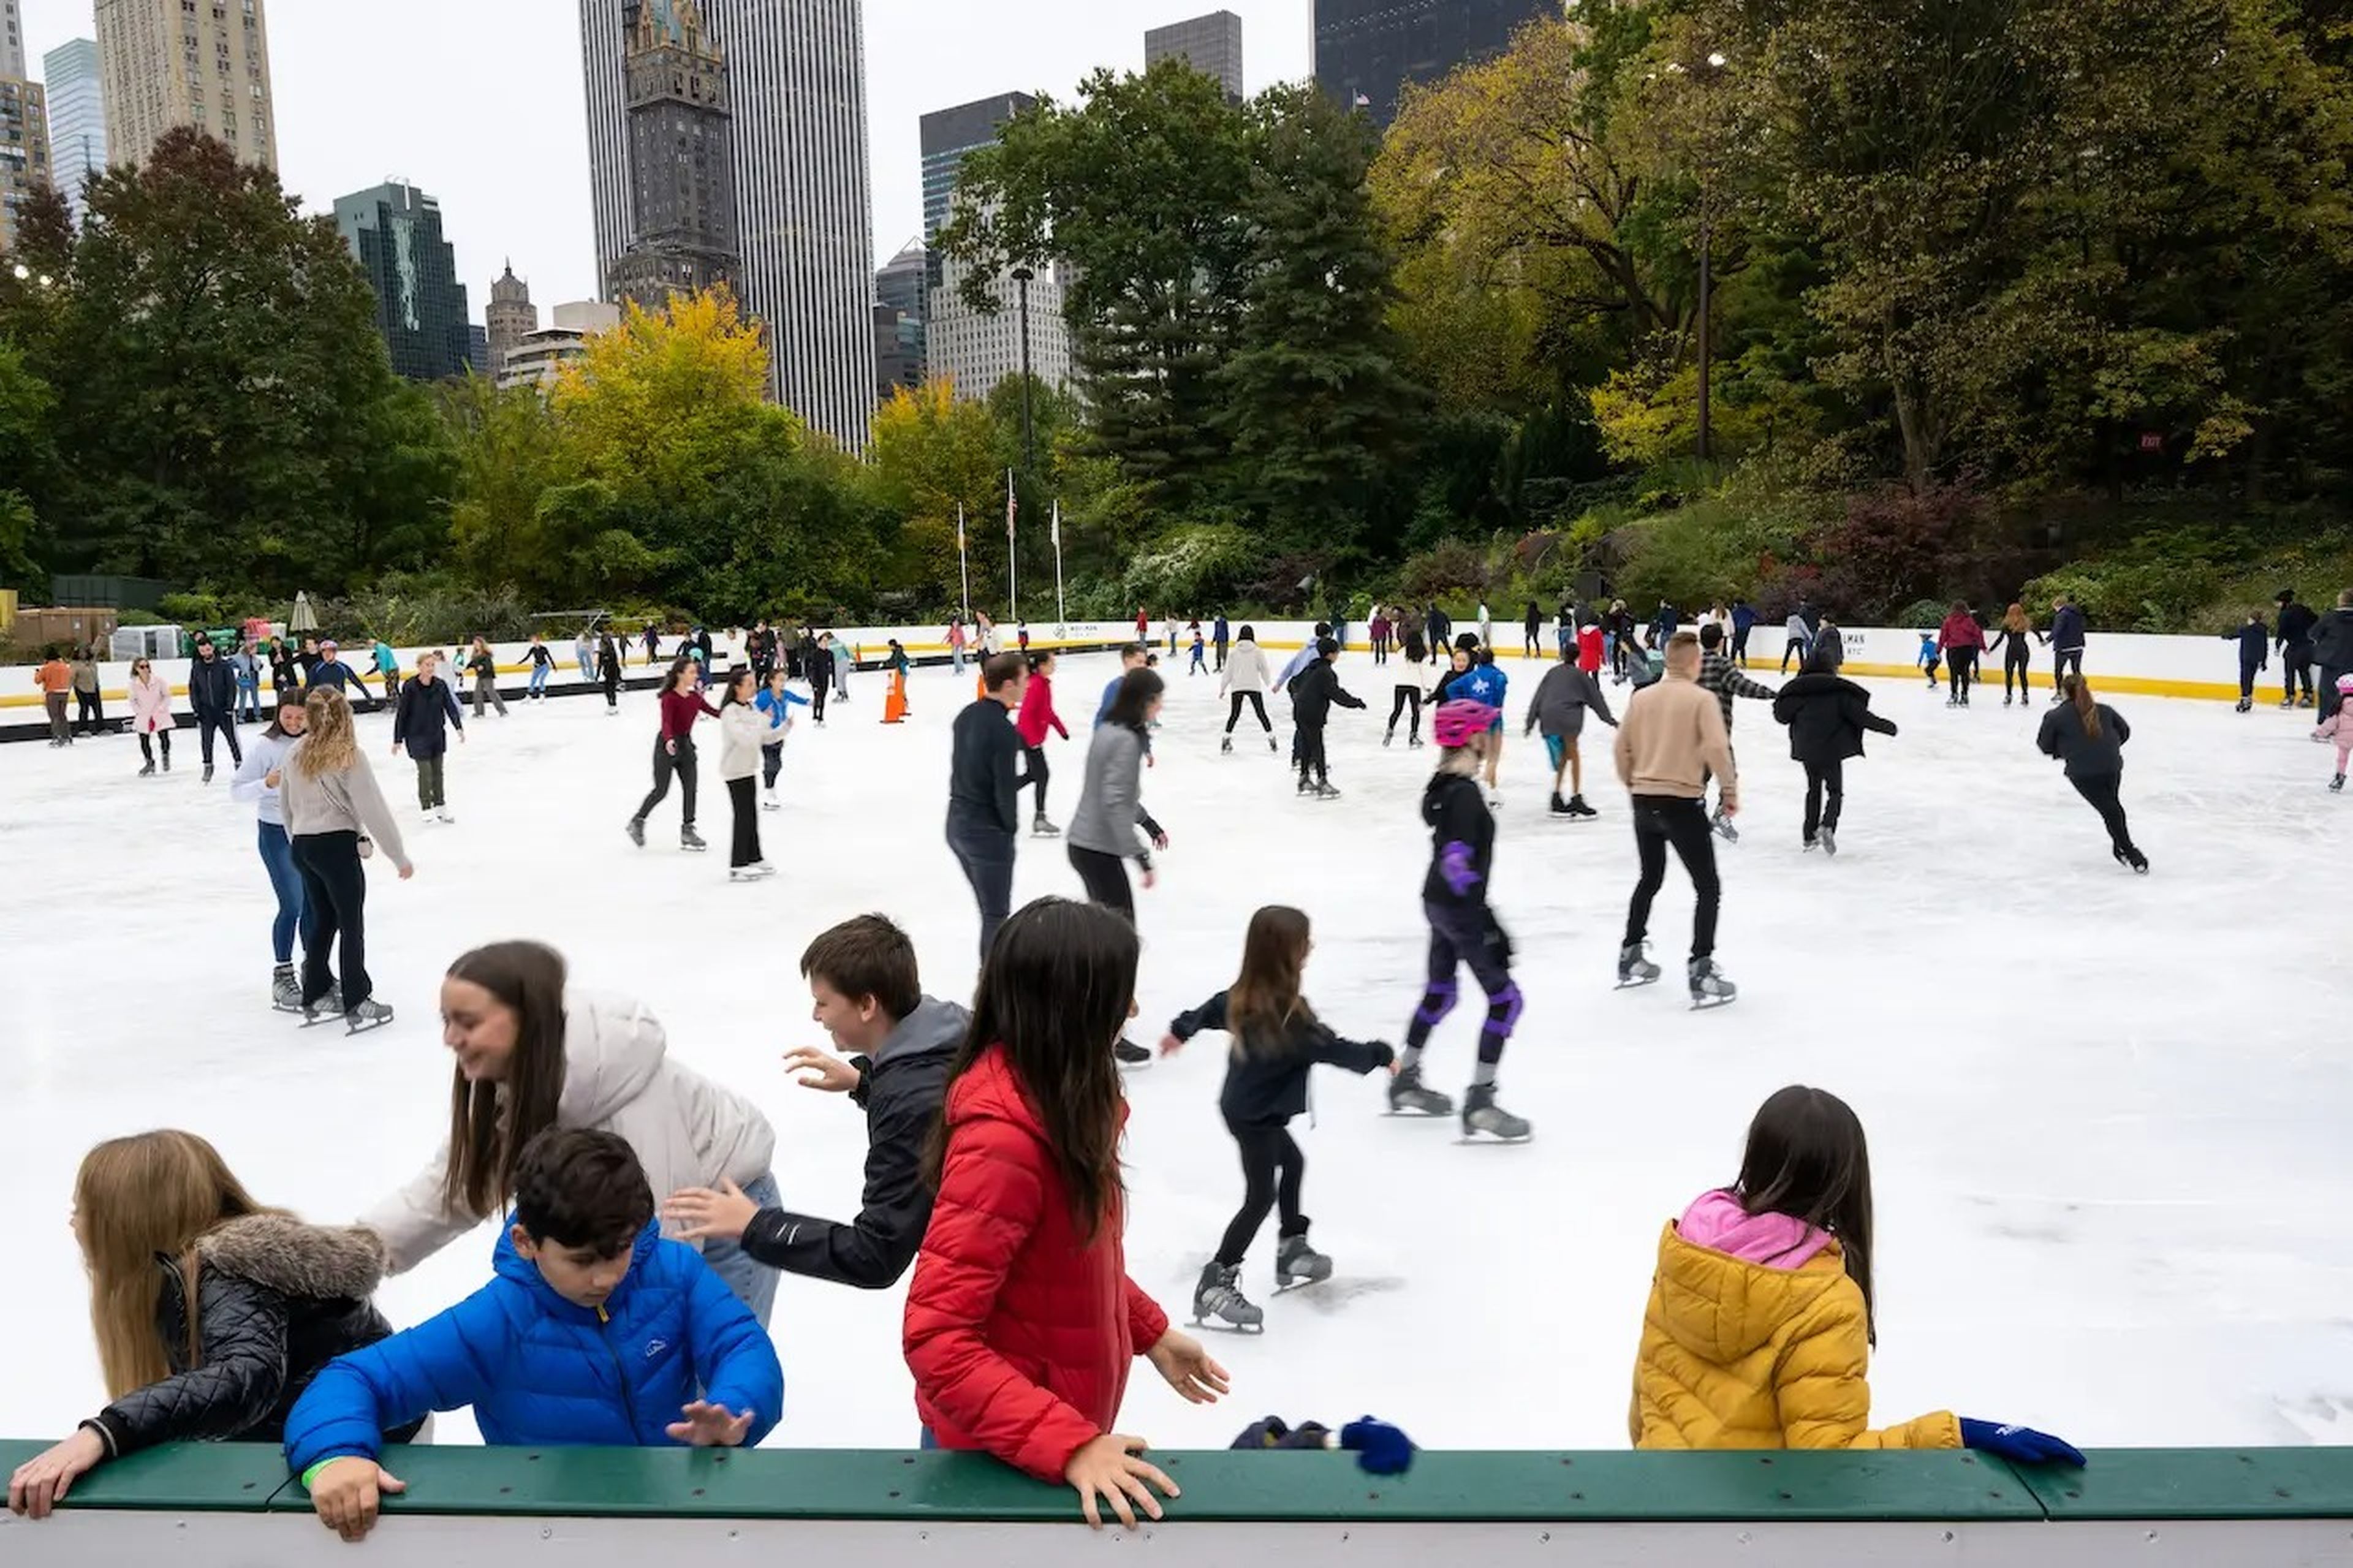 Members of the public and invited guests skate on the first day of the season at Wollman Rink in Central Park on October 23, 2022 in New York City.